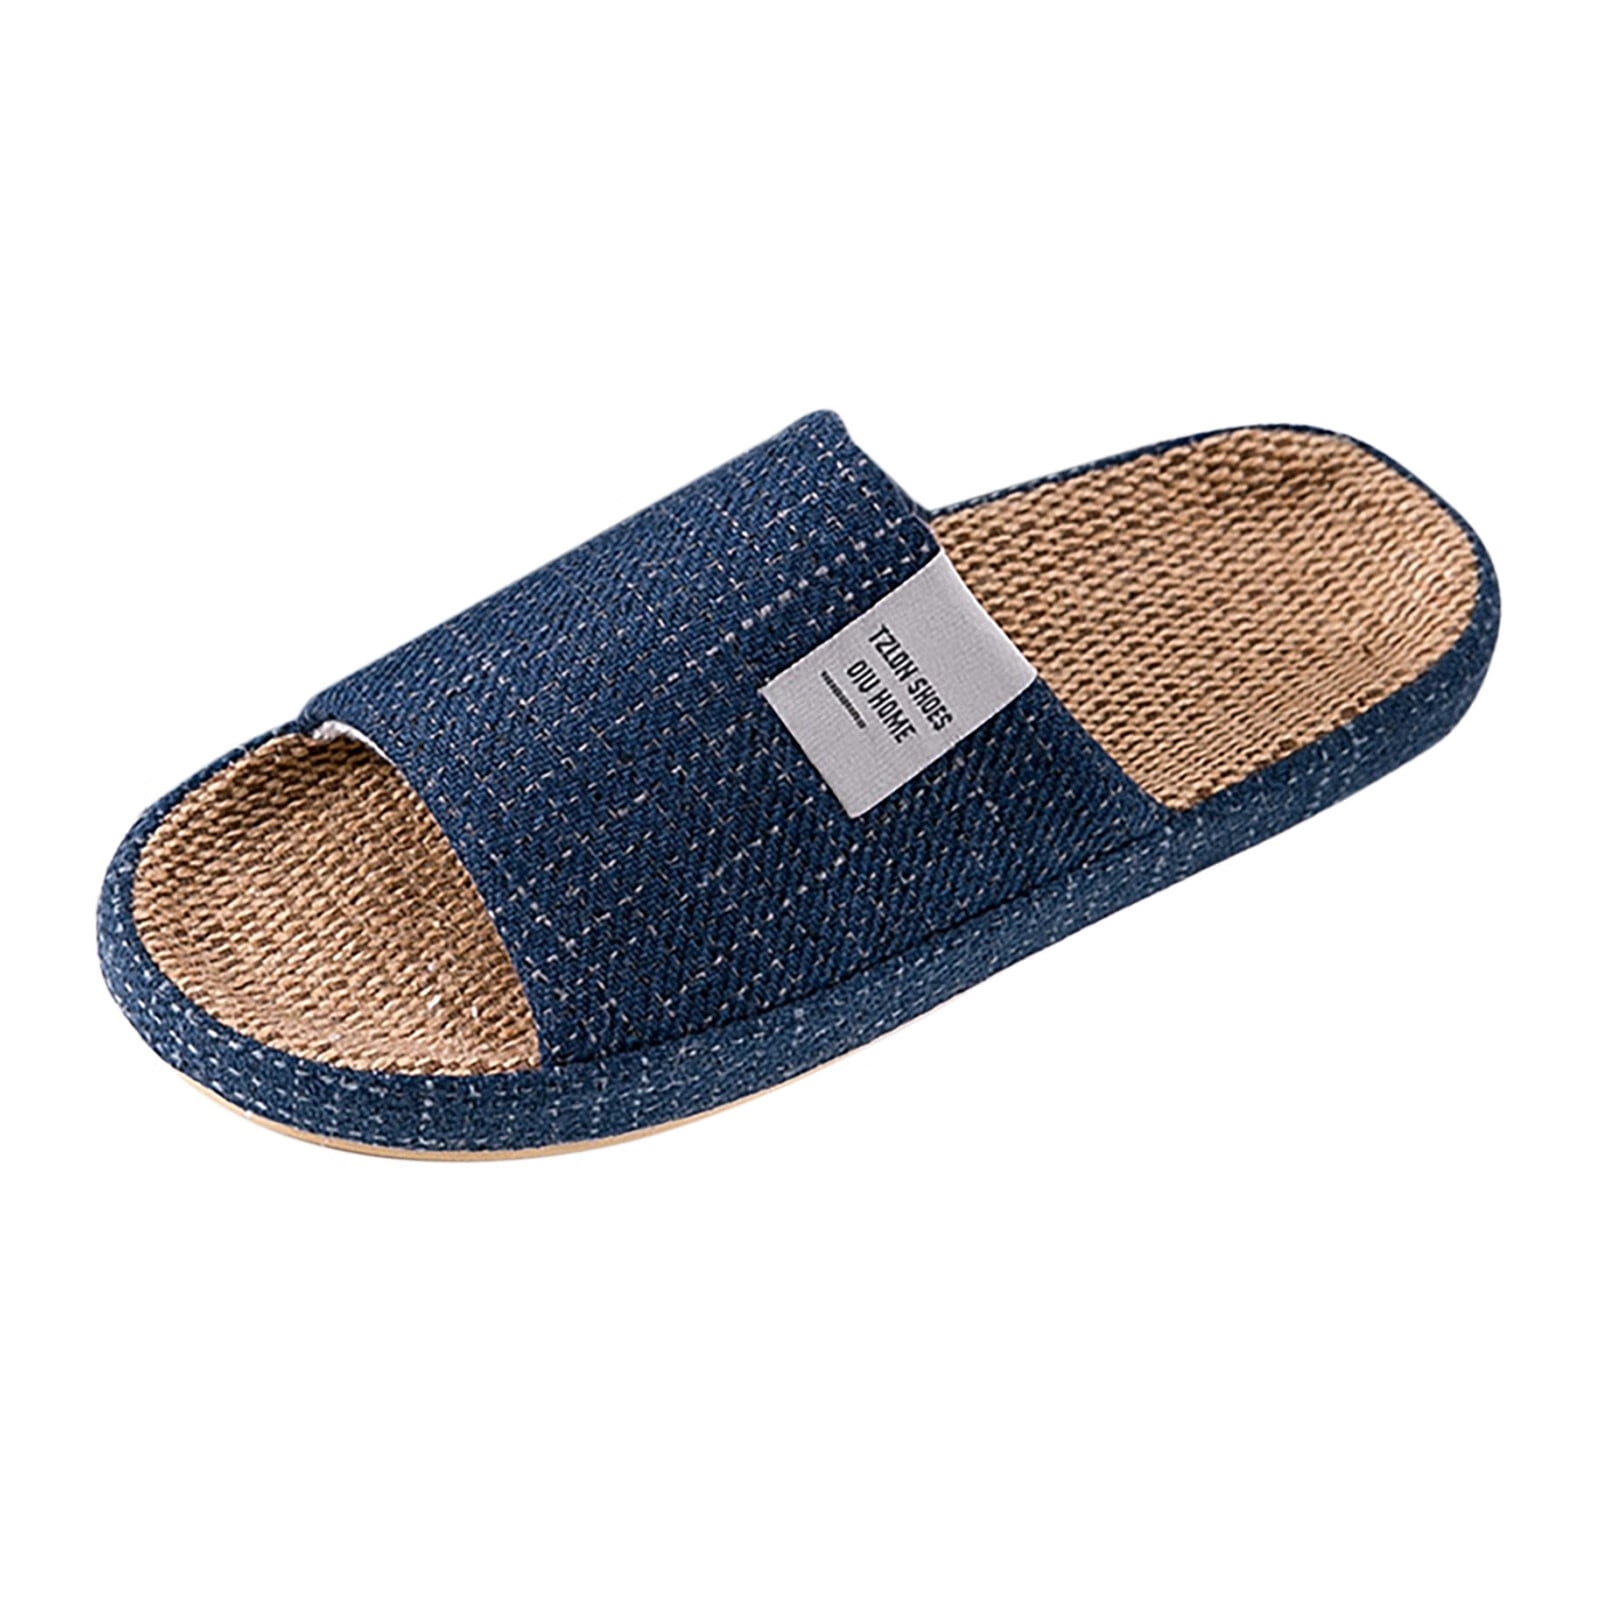 Top Rated Products in Men's Slippers